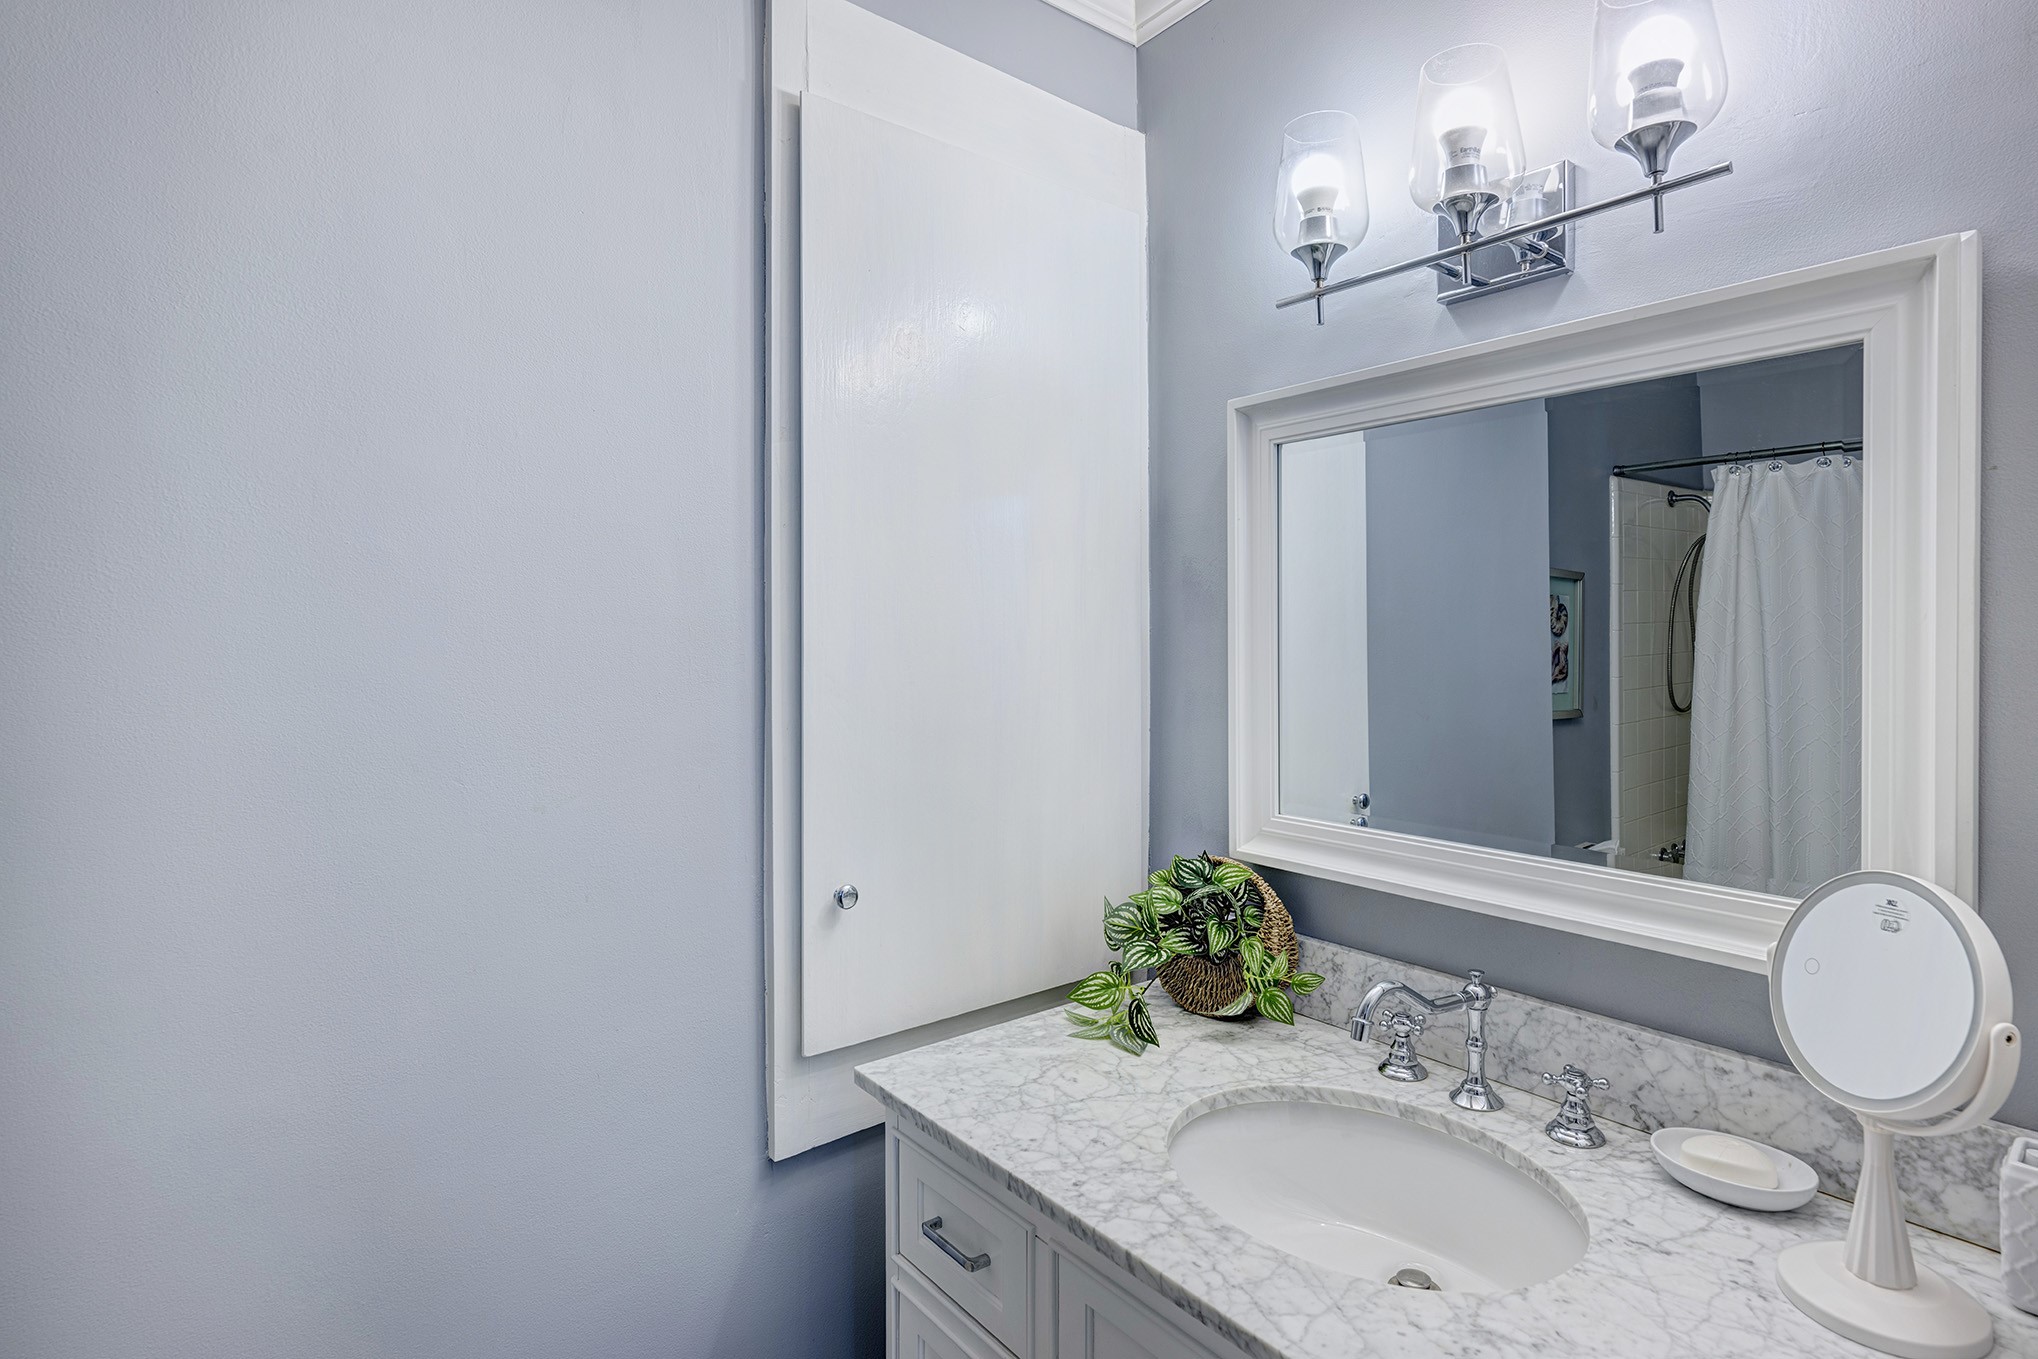 The recently acquired stand-alone vanity is equipped with soft-close drawers and adorned with a Carrera marble countertop, accentuated by an oval under mount sink complemented by a sleek chrome faucet. A capacious in-wall linen closet and a medicine cabinet cater to the storage needs of the bathroom.